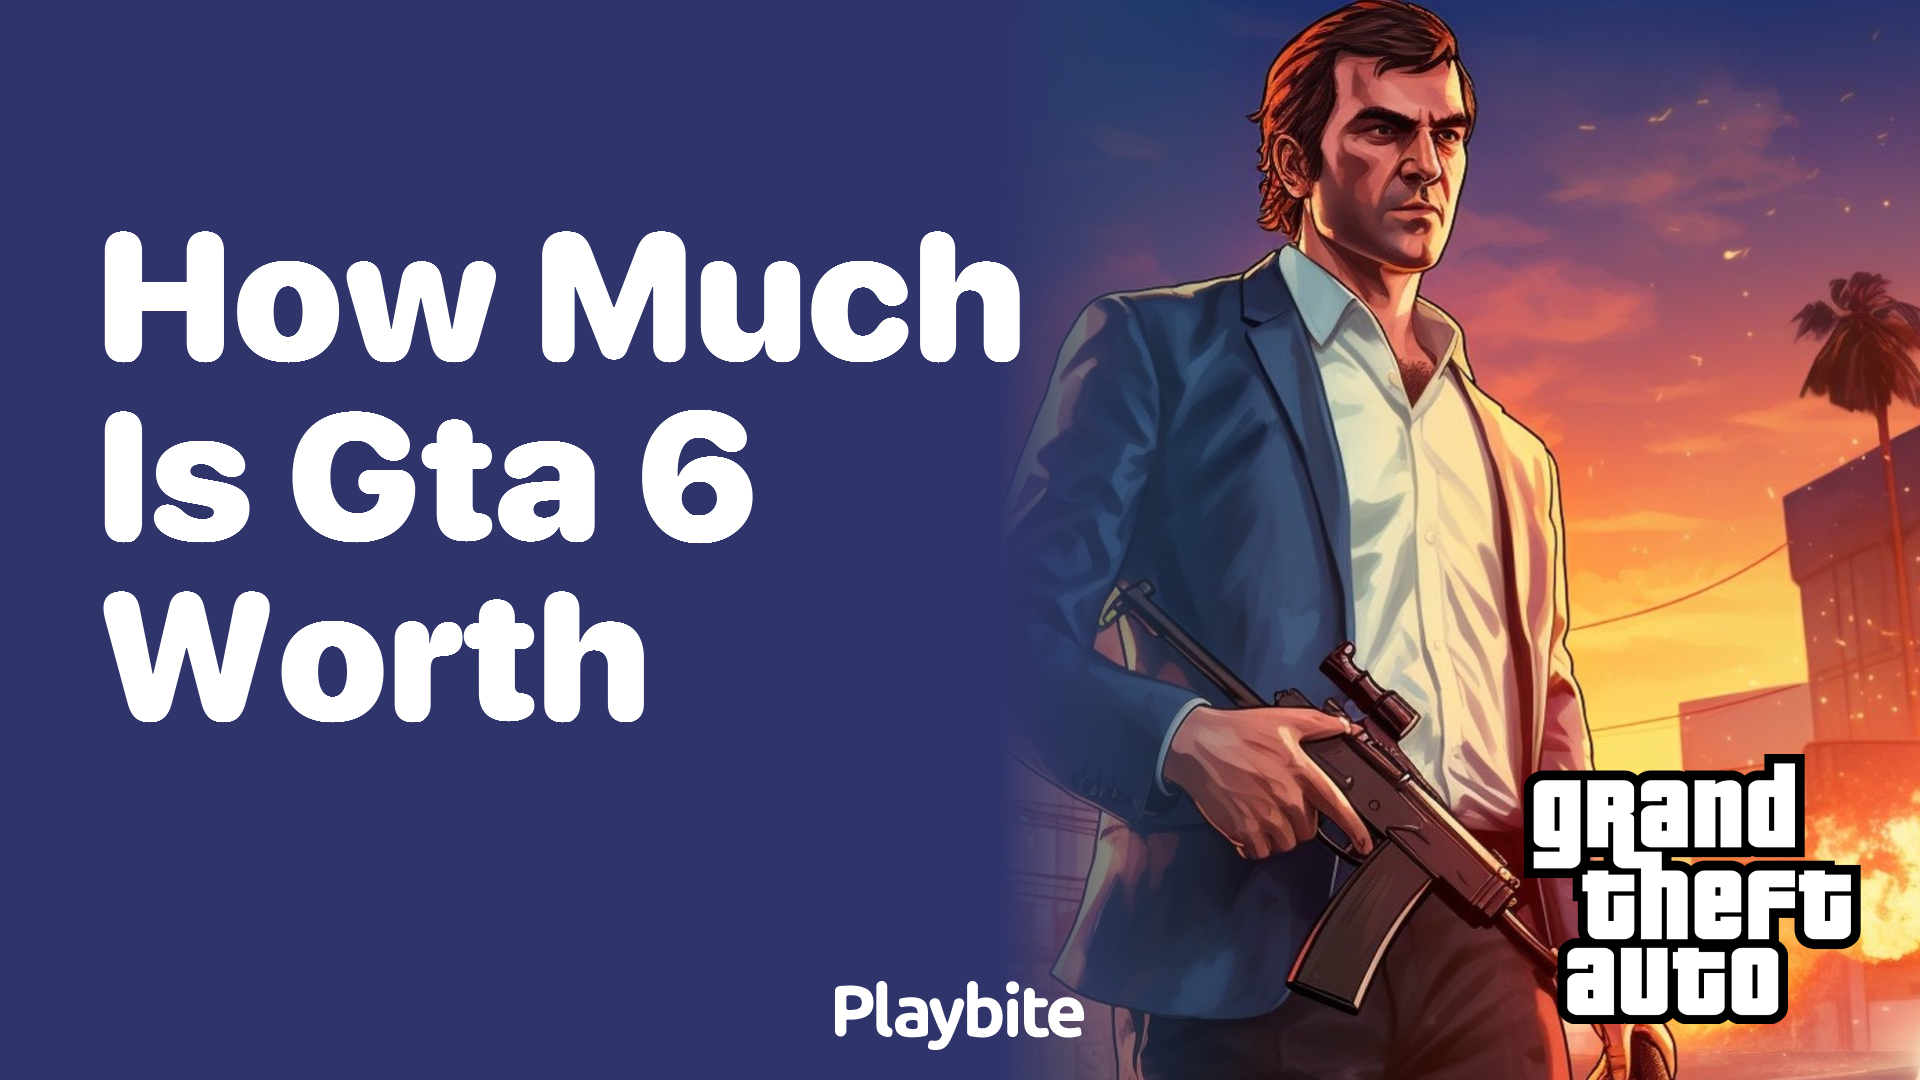 How much is GTA 6 worth?